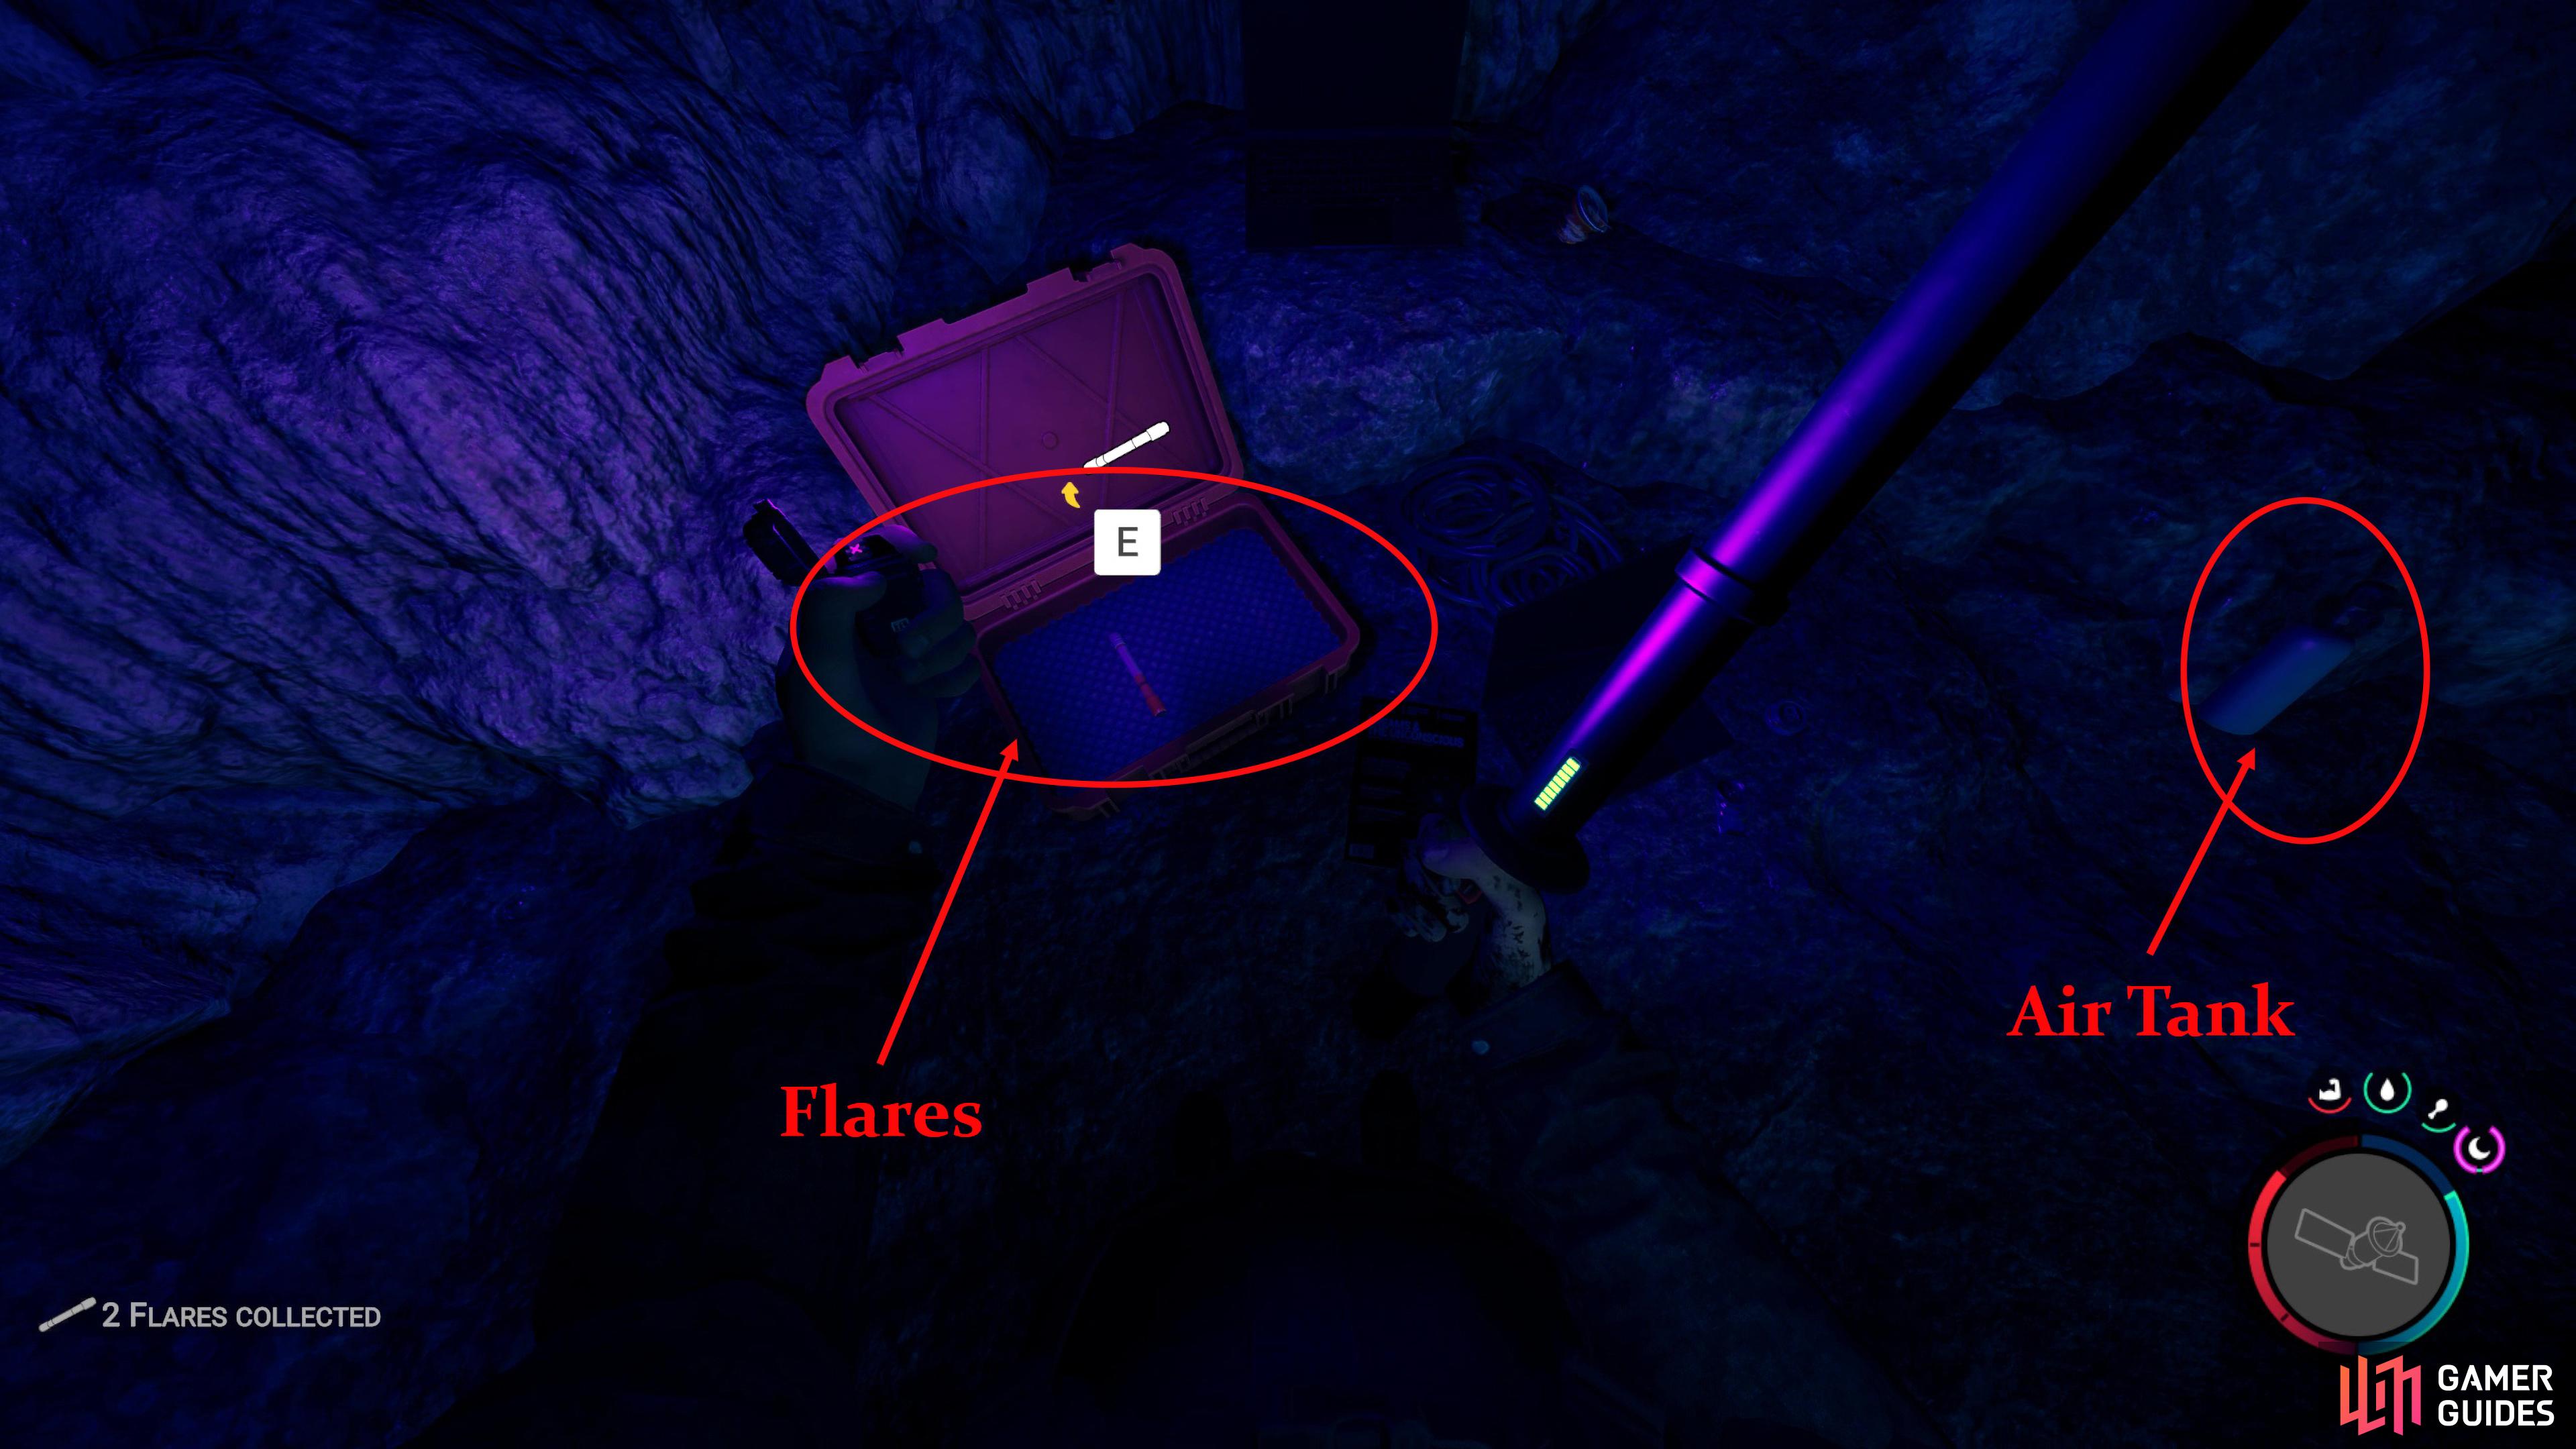 Near the cave entrance you can find some flares and an air tank.